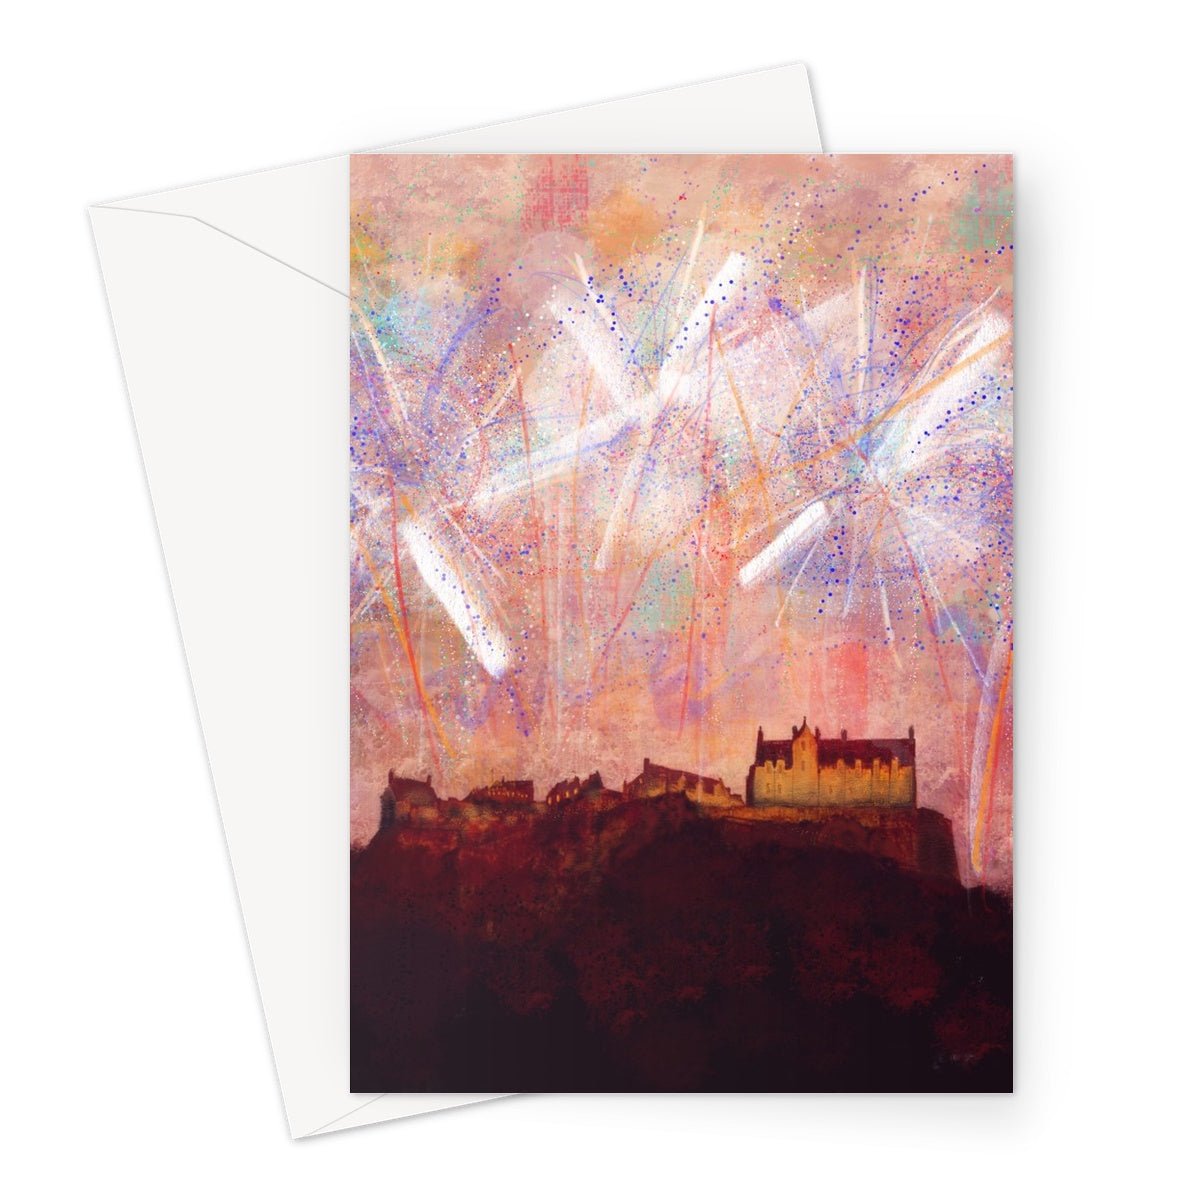 Edinburgh Castle Fireworks Art Gifts Greeting Card-Greetings Cards-Edinburgh & Glasgow Art Gallery-A5 Portrait-10 Cards-Paintings, Prints, Homeware, Art Gifts From Scotland By Scottish Artist Kevin Hunter